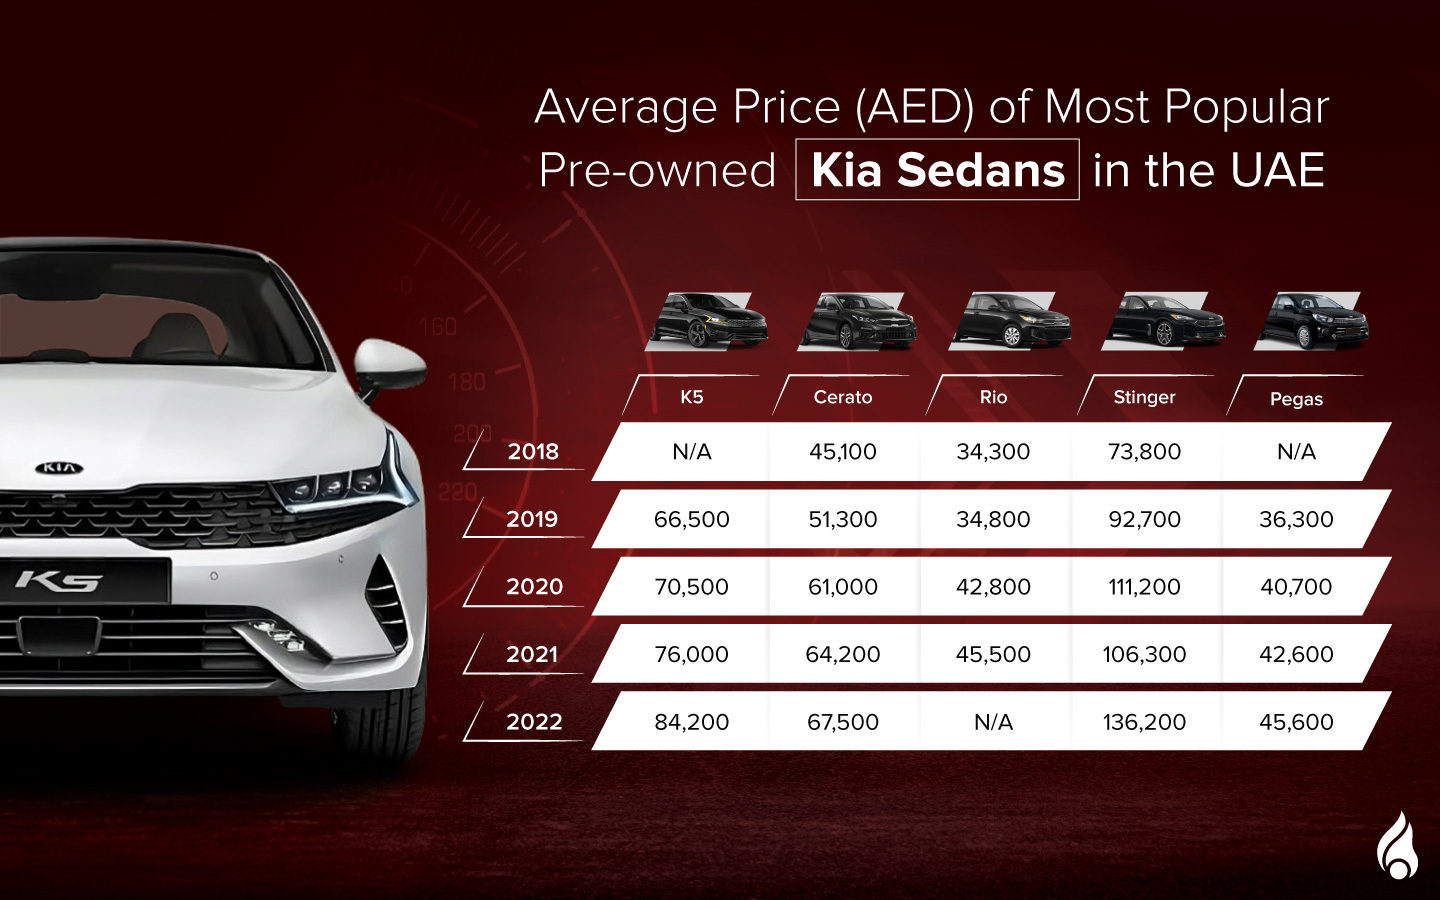 Average prices of top used Kia sedans in the UAE for model years 2019 to 2023